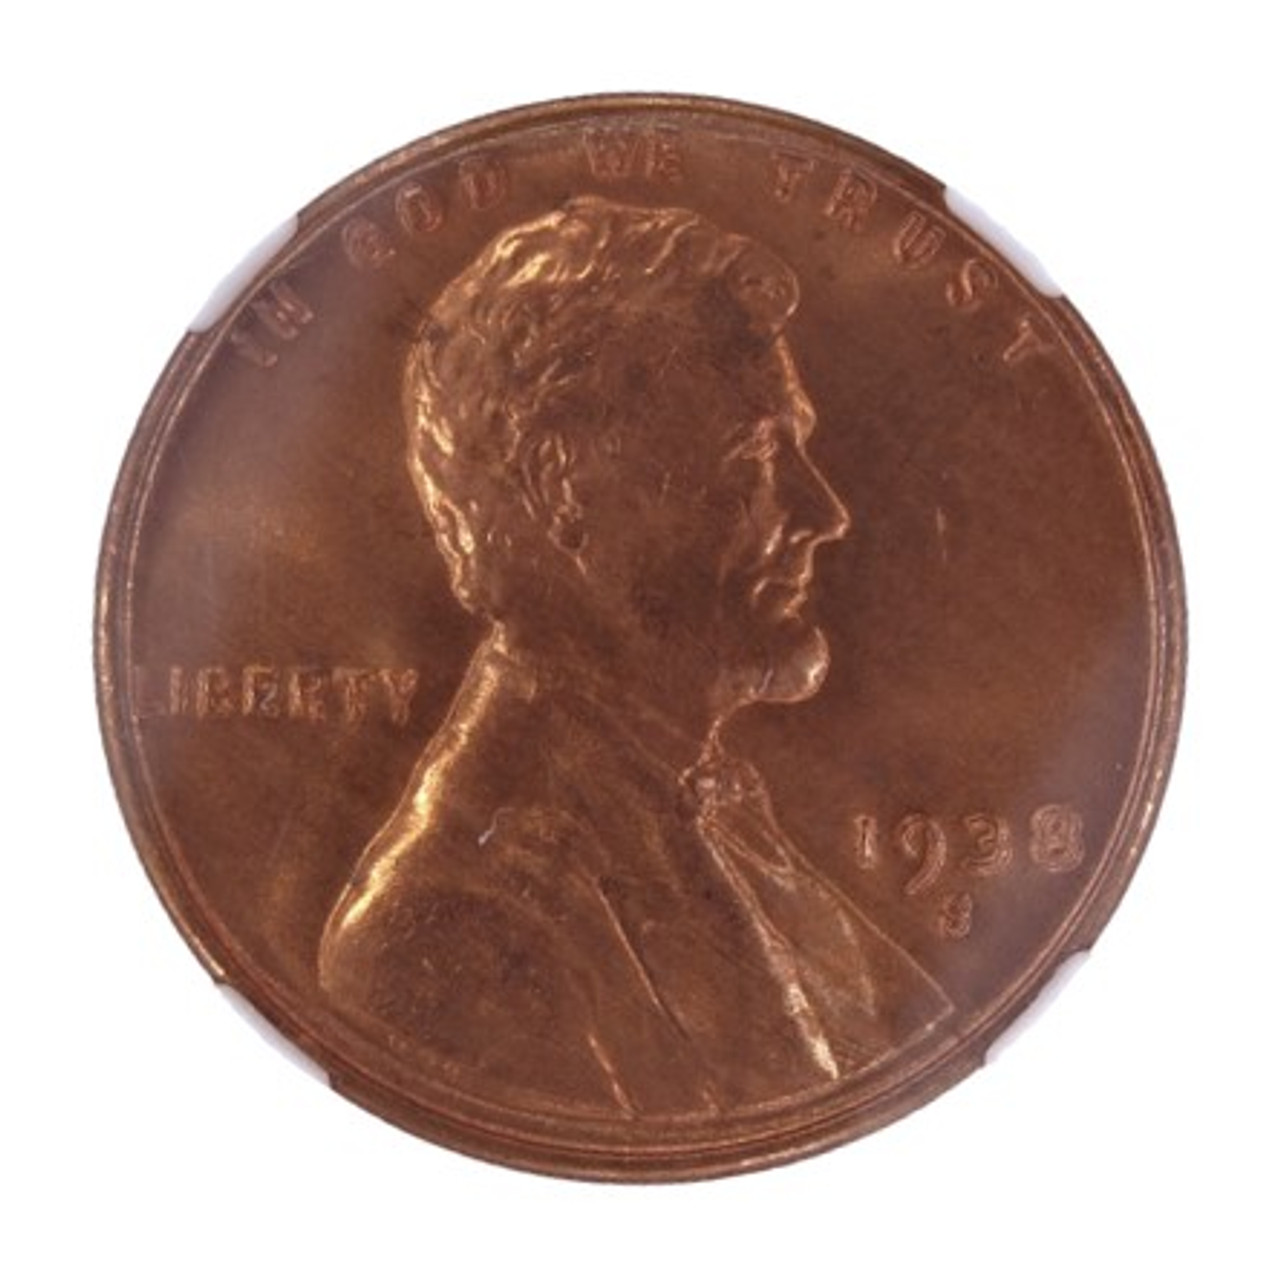 1 Cent 1998, Cent, Lincoln Memorial (1959-2008) - United States of